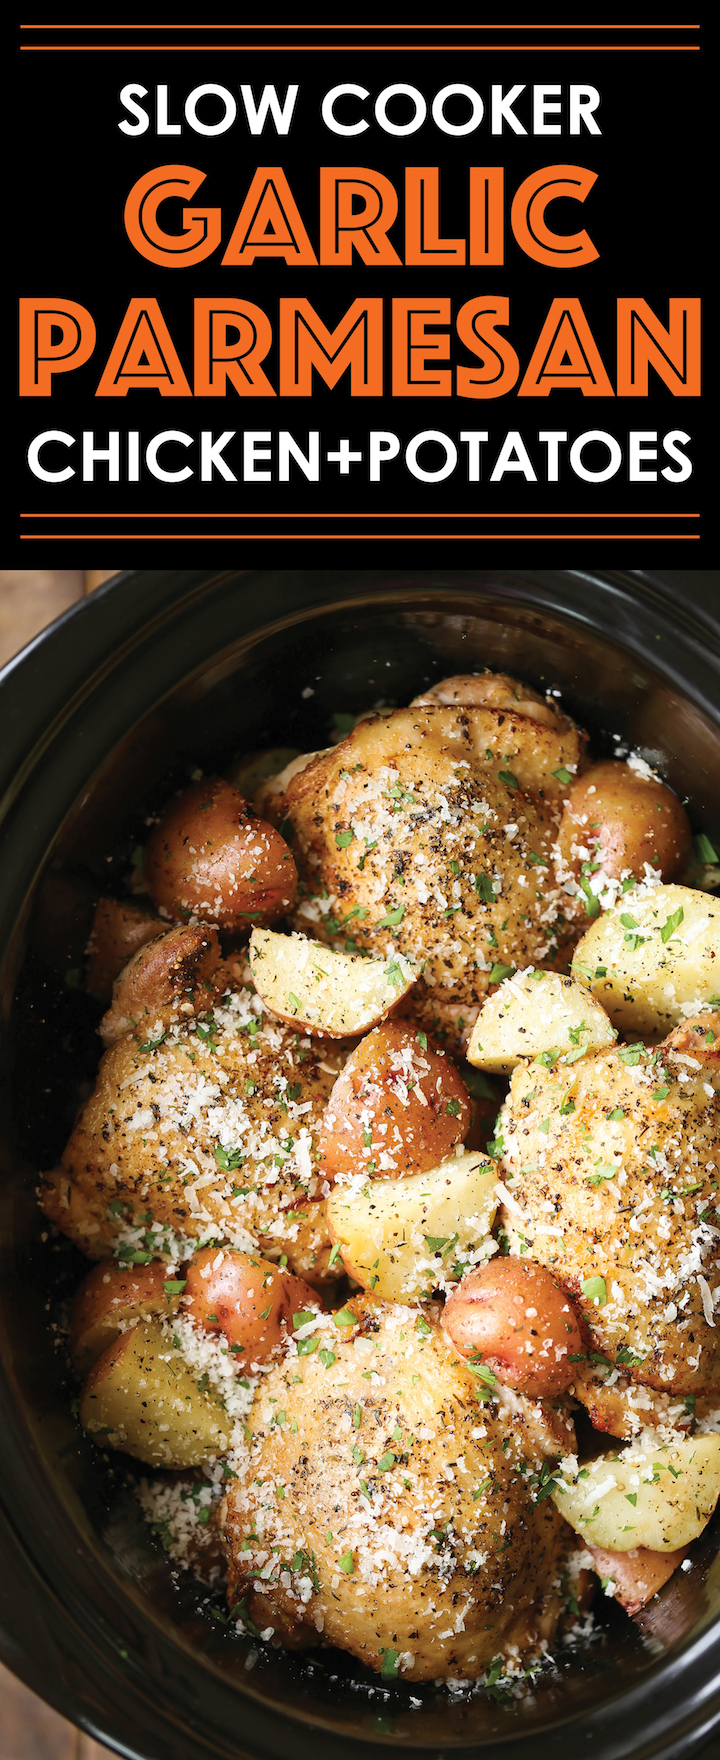 Slow Cooker Garlic Parmesan Chicken and Potatoes | Mouthwatering Crockpot Recipes To Prepare This Winter | Easy Slow Cooker Recipes